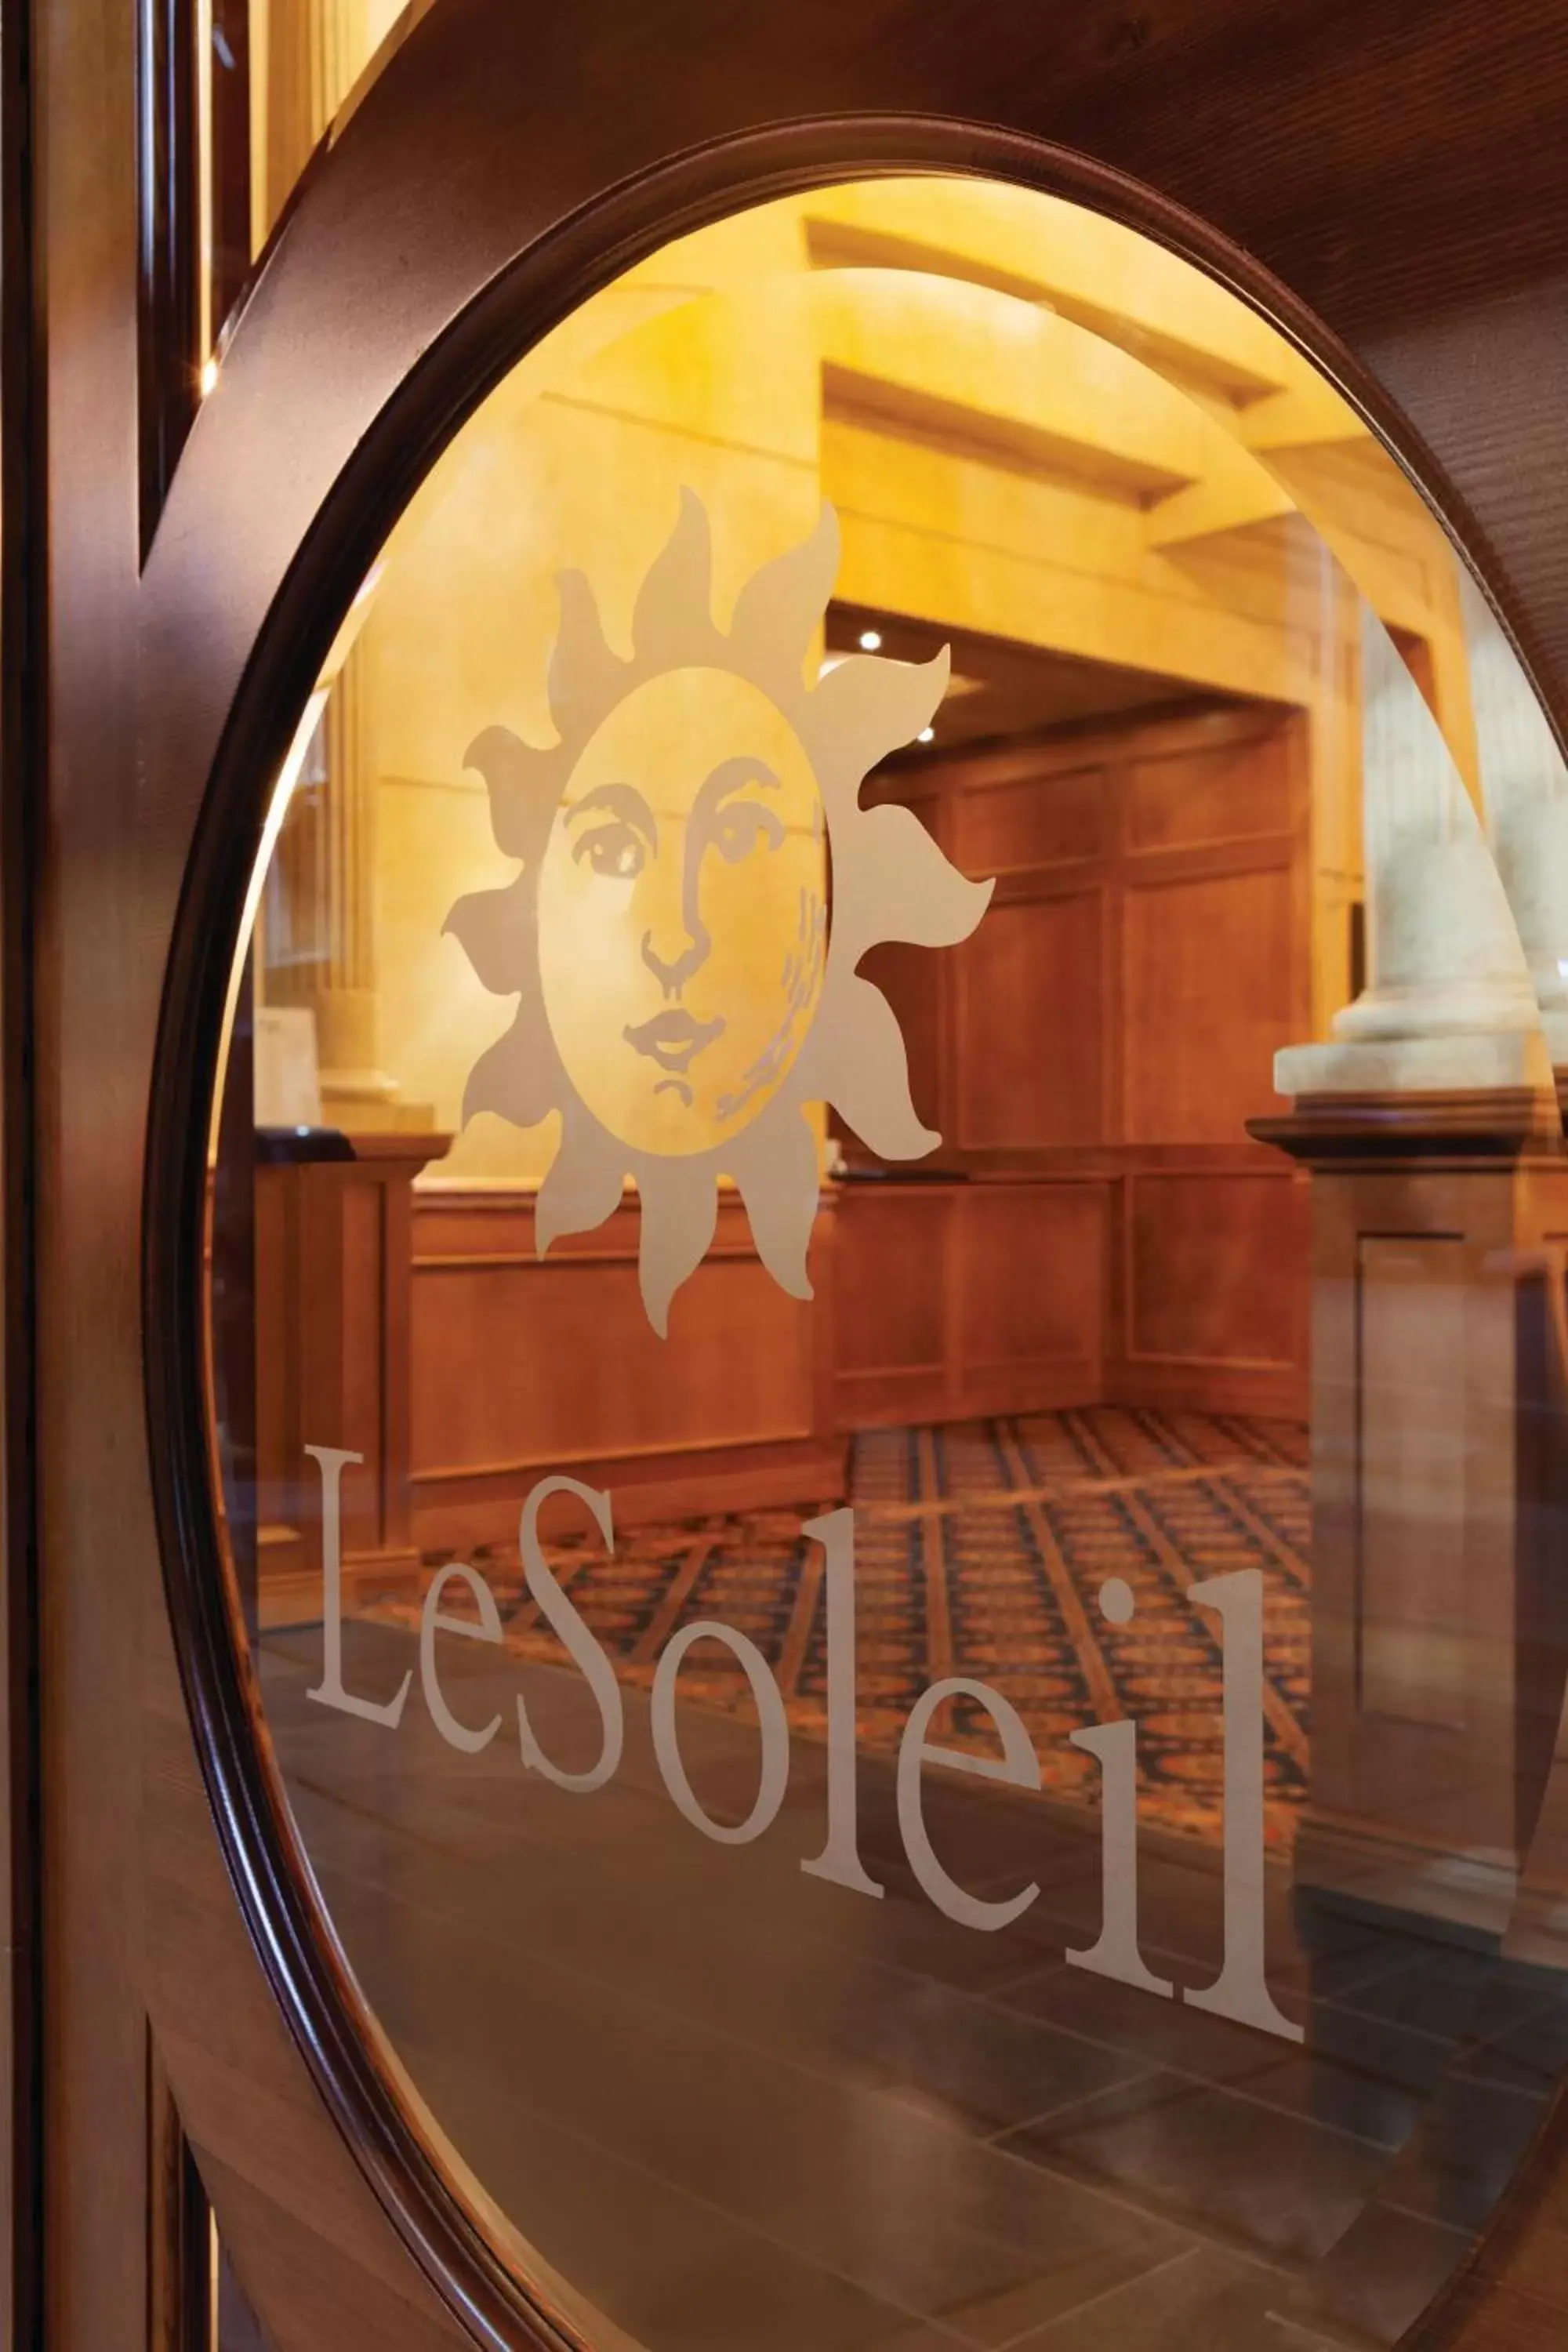 Property logo or sign, Property Logo/Sign in Executive Hotel Le Soleil New York